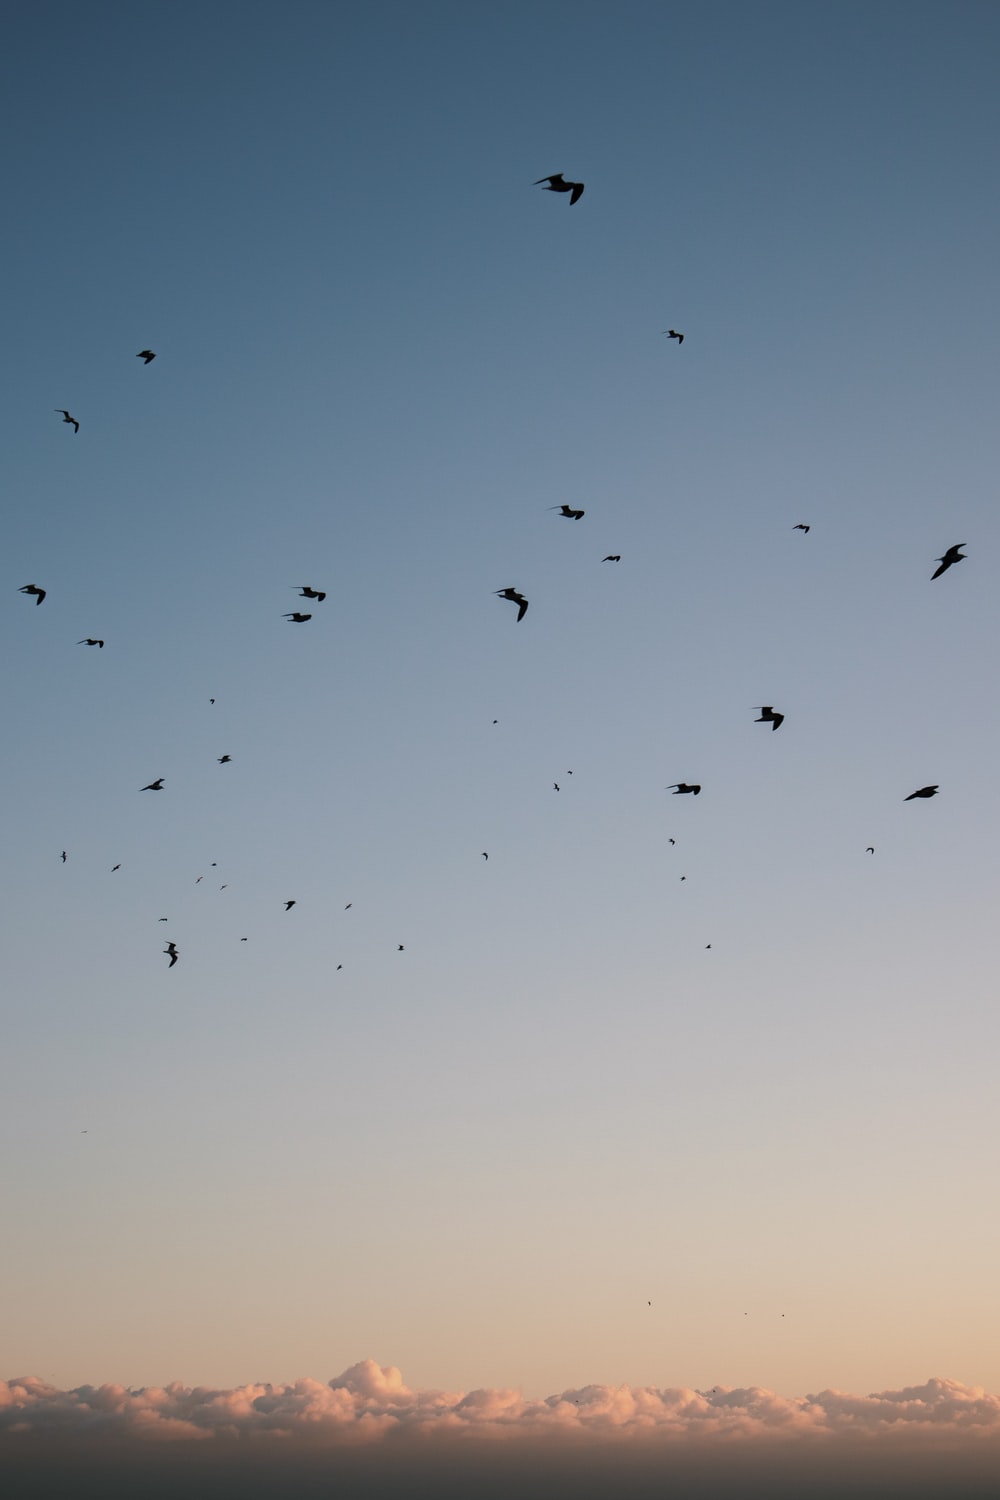 Birds In Sky Picture. Download Free Image